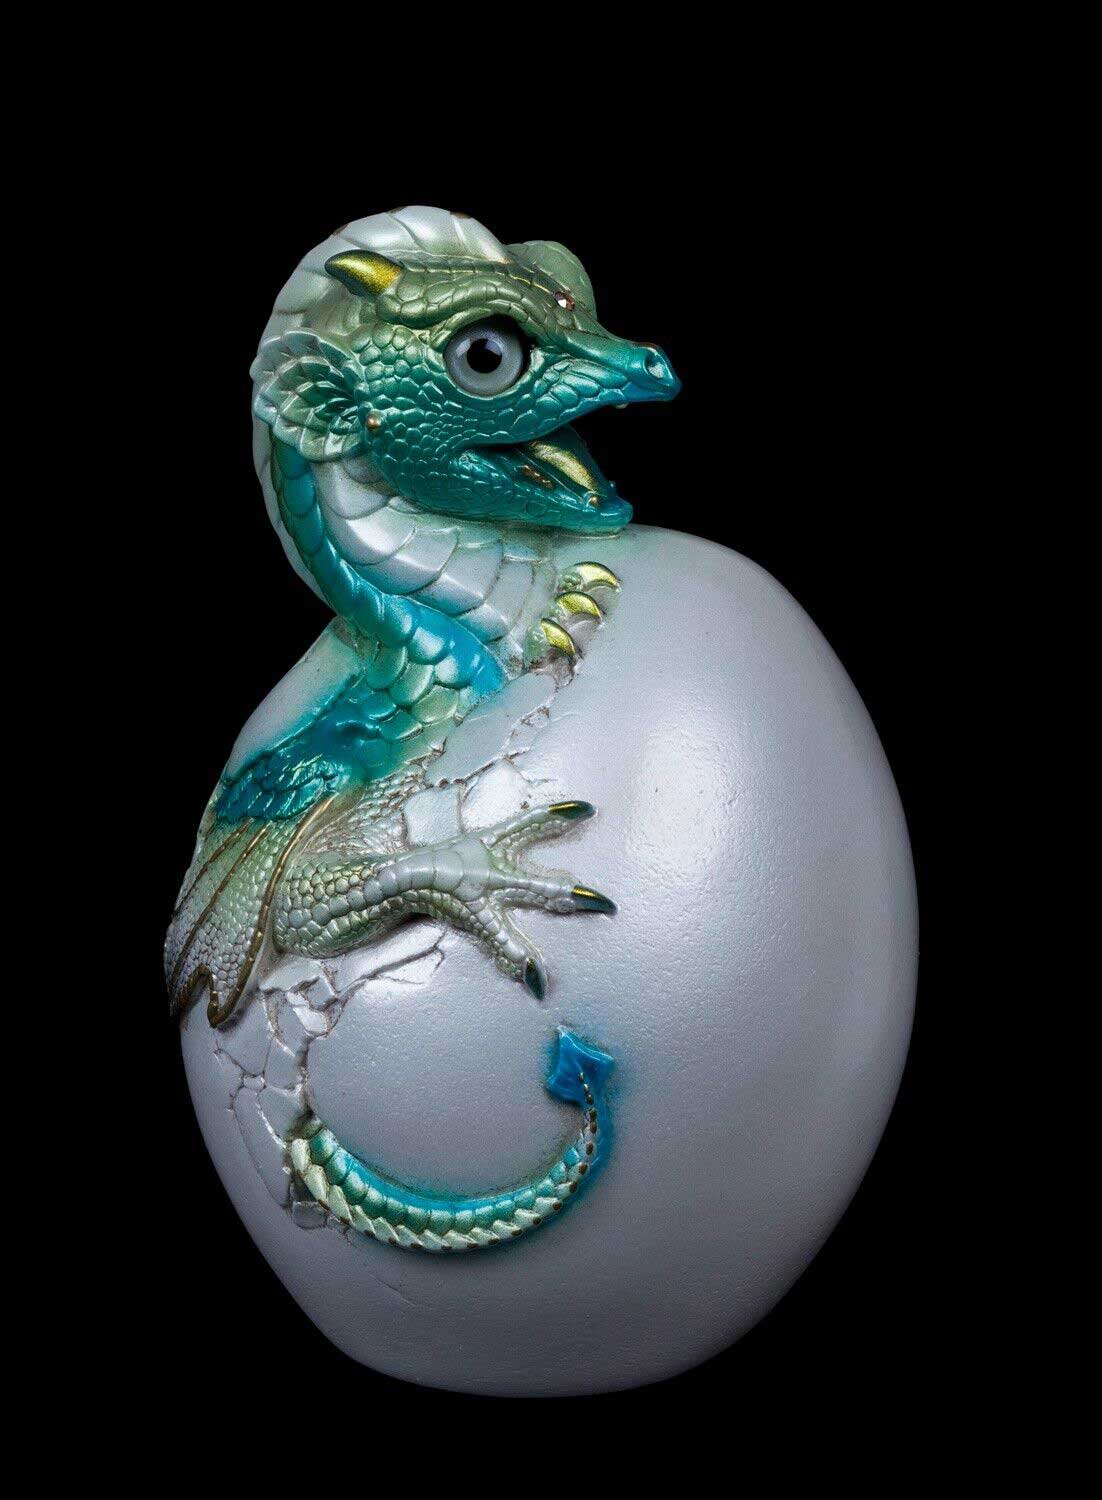 20230318-Seaglass-Hatching-Emperor-Dragon-Test-Paint-1-by-Gina